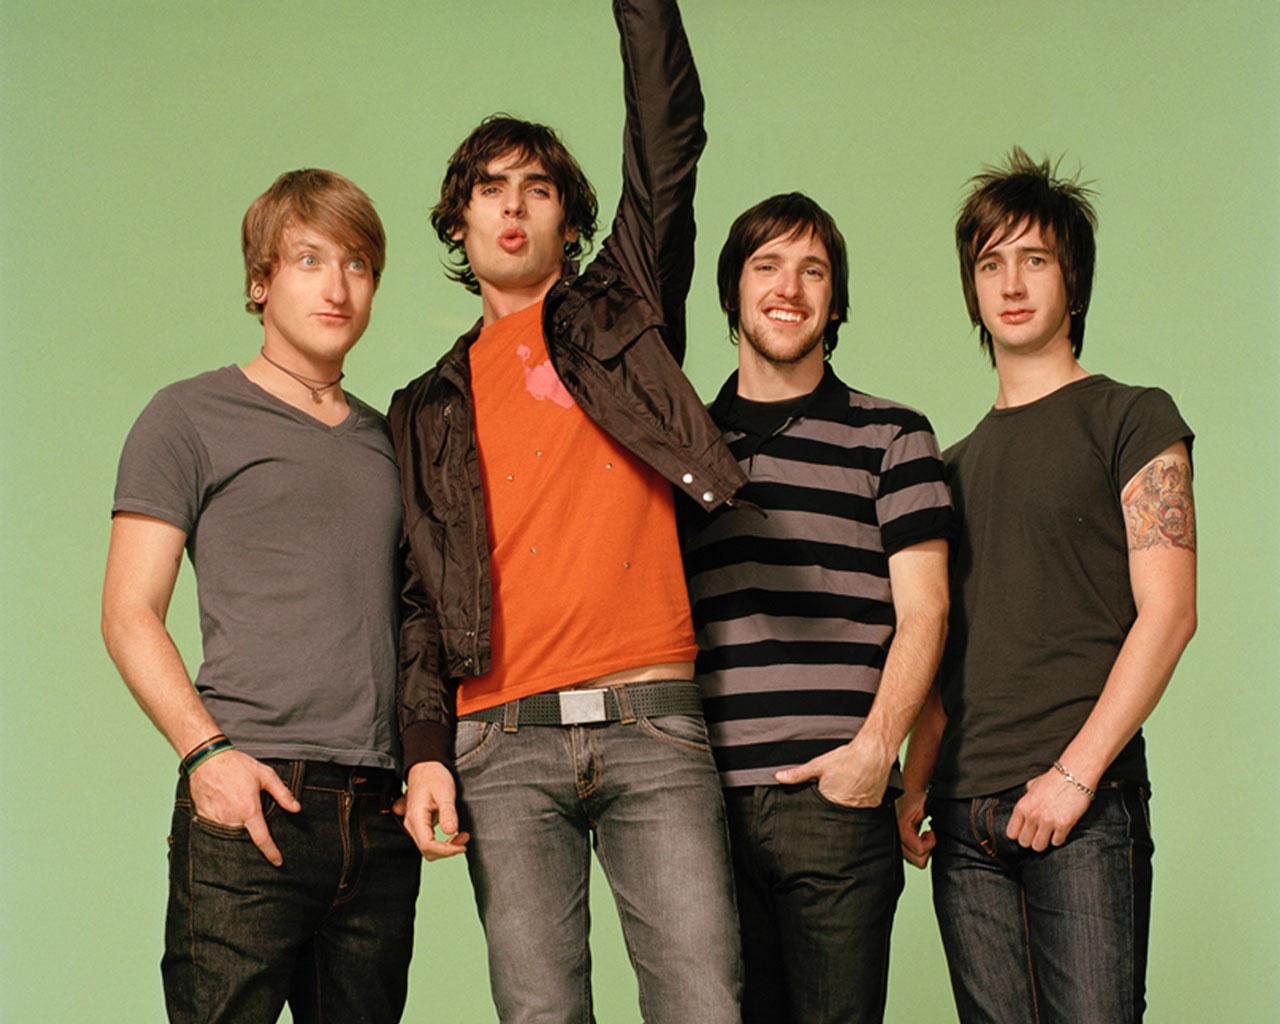 The All American Rejects Wallpaper #4 1280 x 1024 